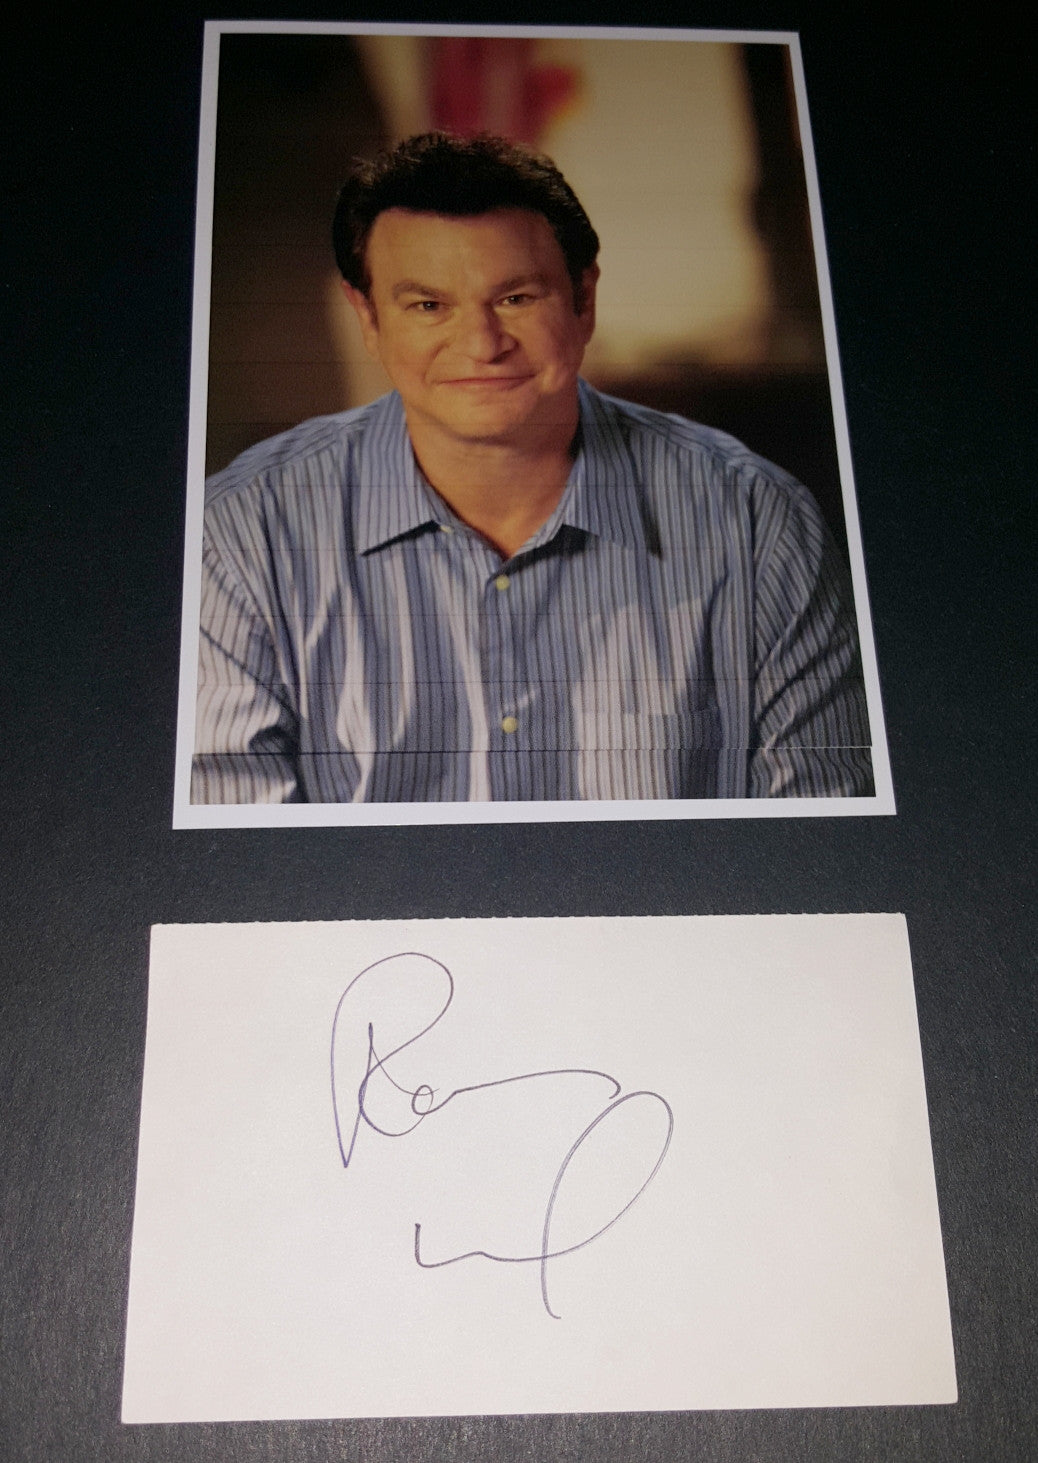 ACTOR COMEDIAN ROBERT WUHL HAND SIGNED CARD AND NICE 5X7" PRINT